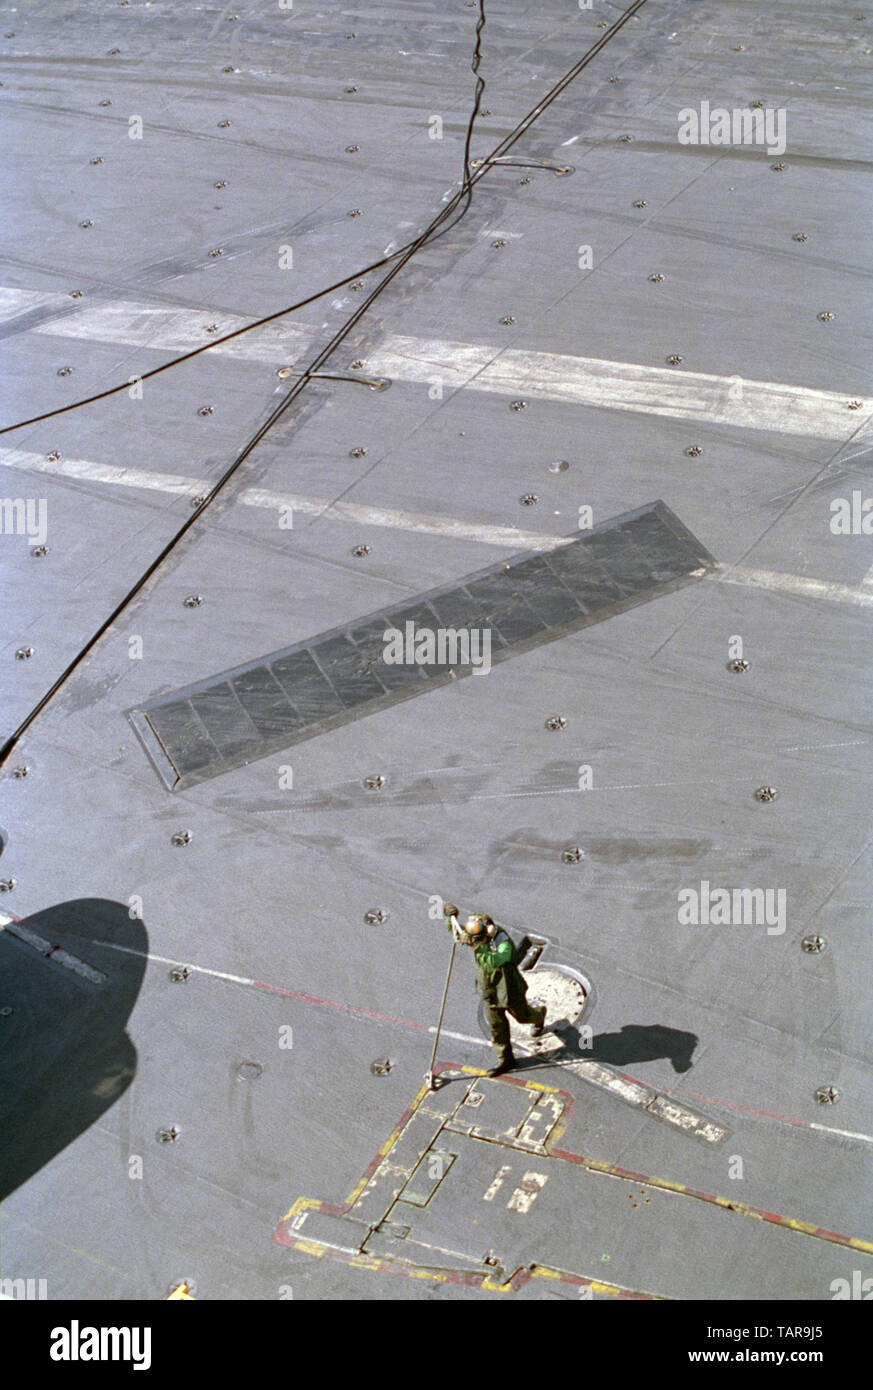 1st November 1993 Operation Continue Hope. A Green shirt with an arresting-gear tool on the flight deck of the U.S. Navy aircraft carrier USS Abraham Lincoln in the Indian Ocean, 50 miles off Mogadishu, Somalia. Stock Photo